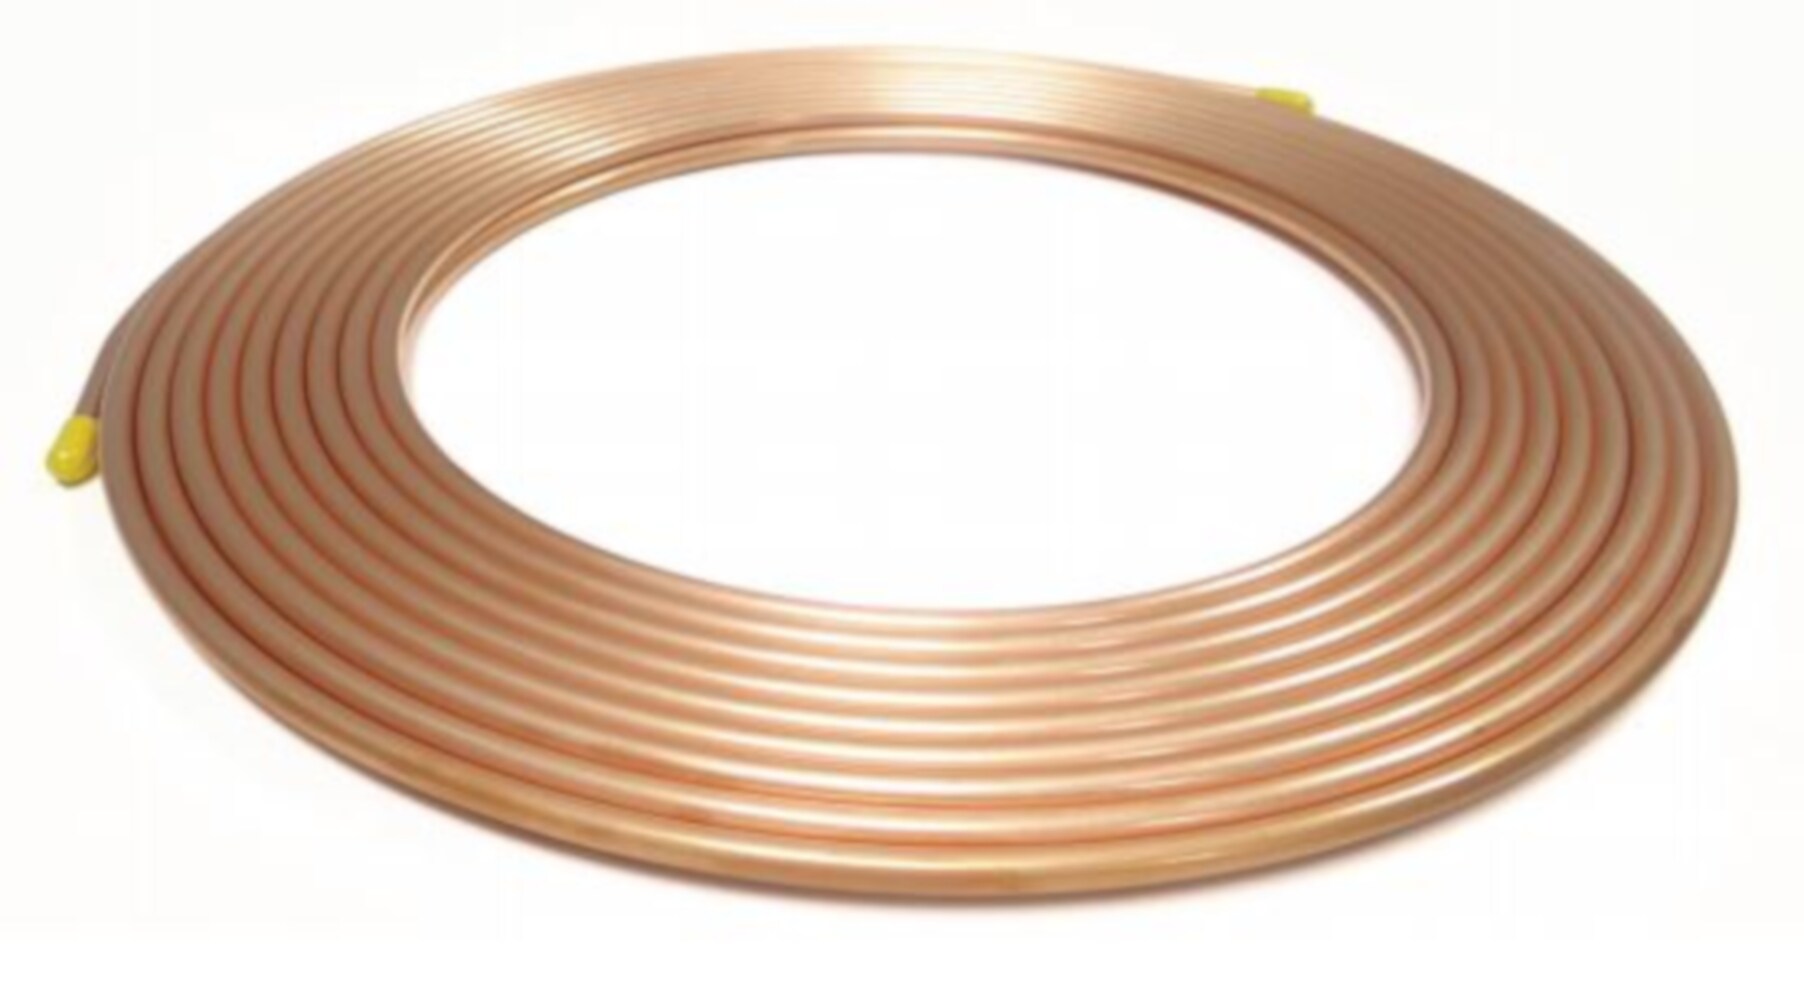 7 8 Copper Tubing Lowes